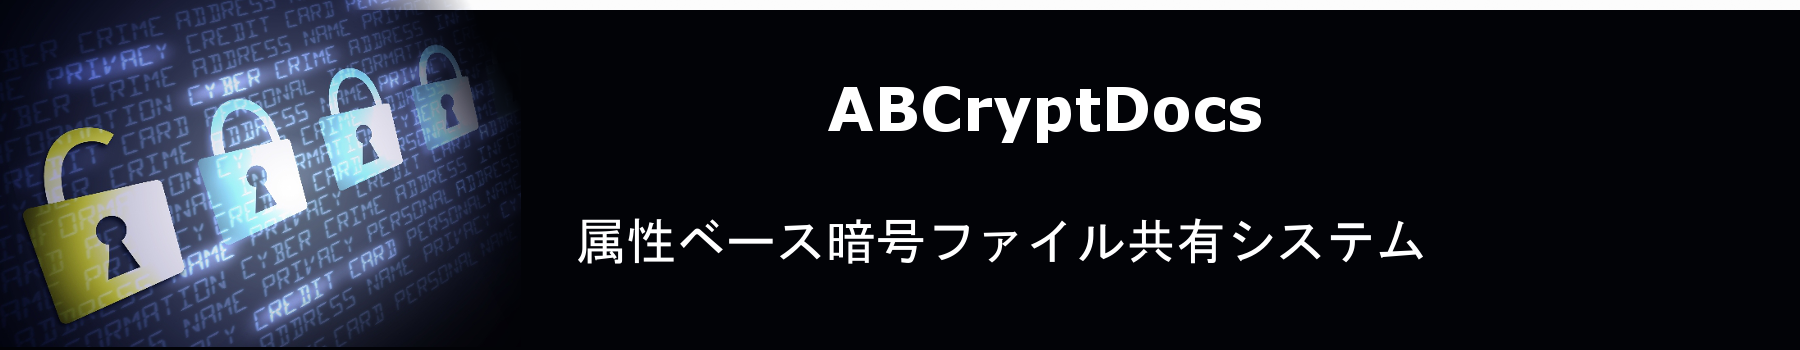 ABCDロゴ